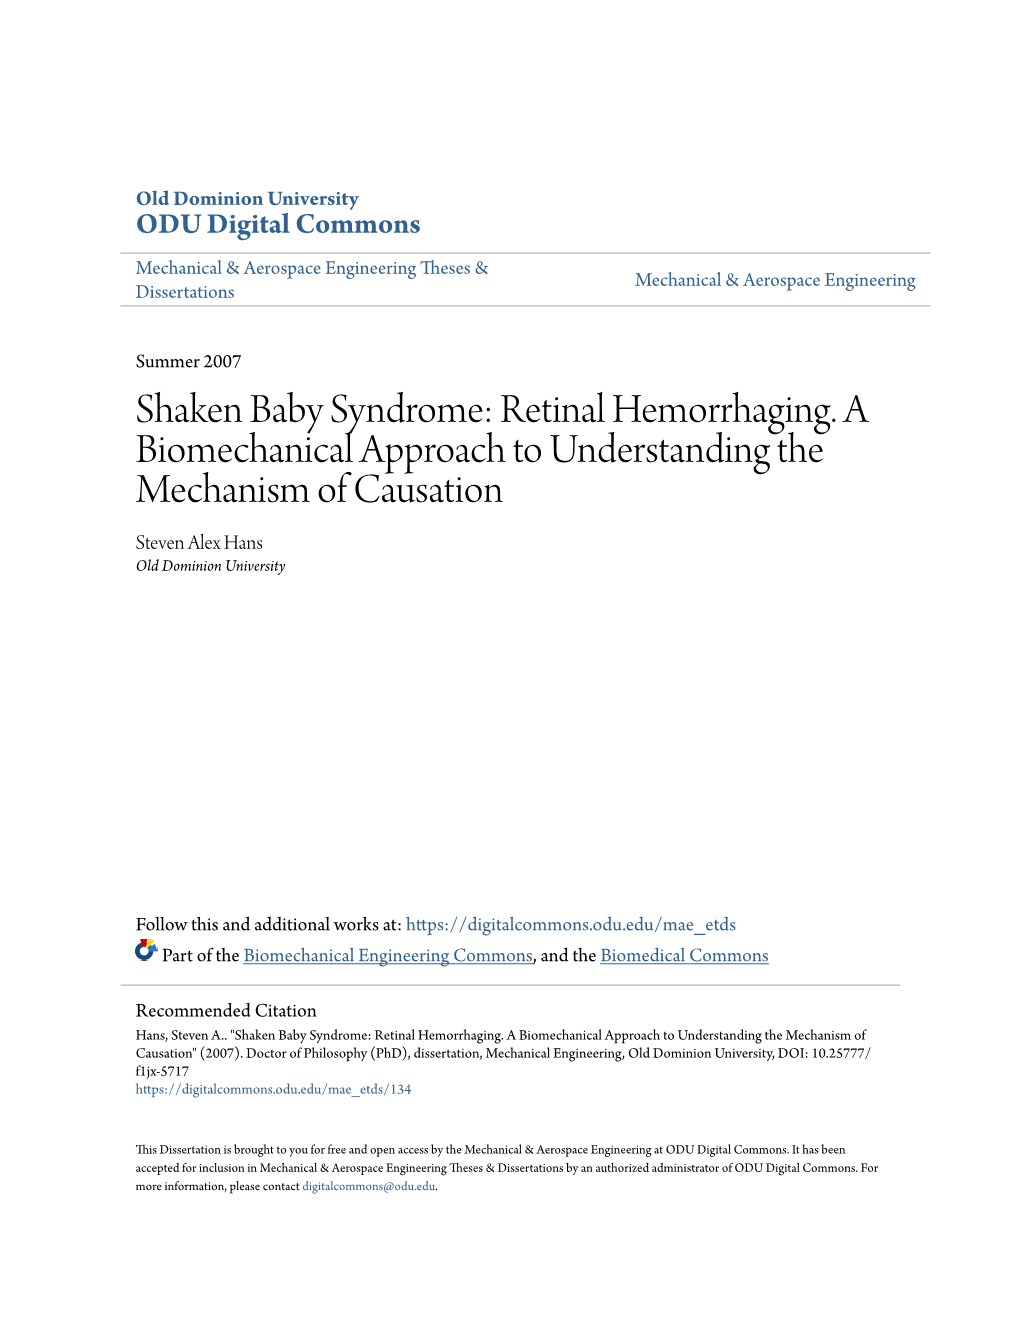 Shaken Baby Syndrome: Retinal Hemorrhaging. a Biomechanical Approach to Understanding the Mechanism of Causation Steven Alex Hans Old Dominion University